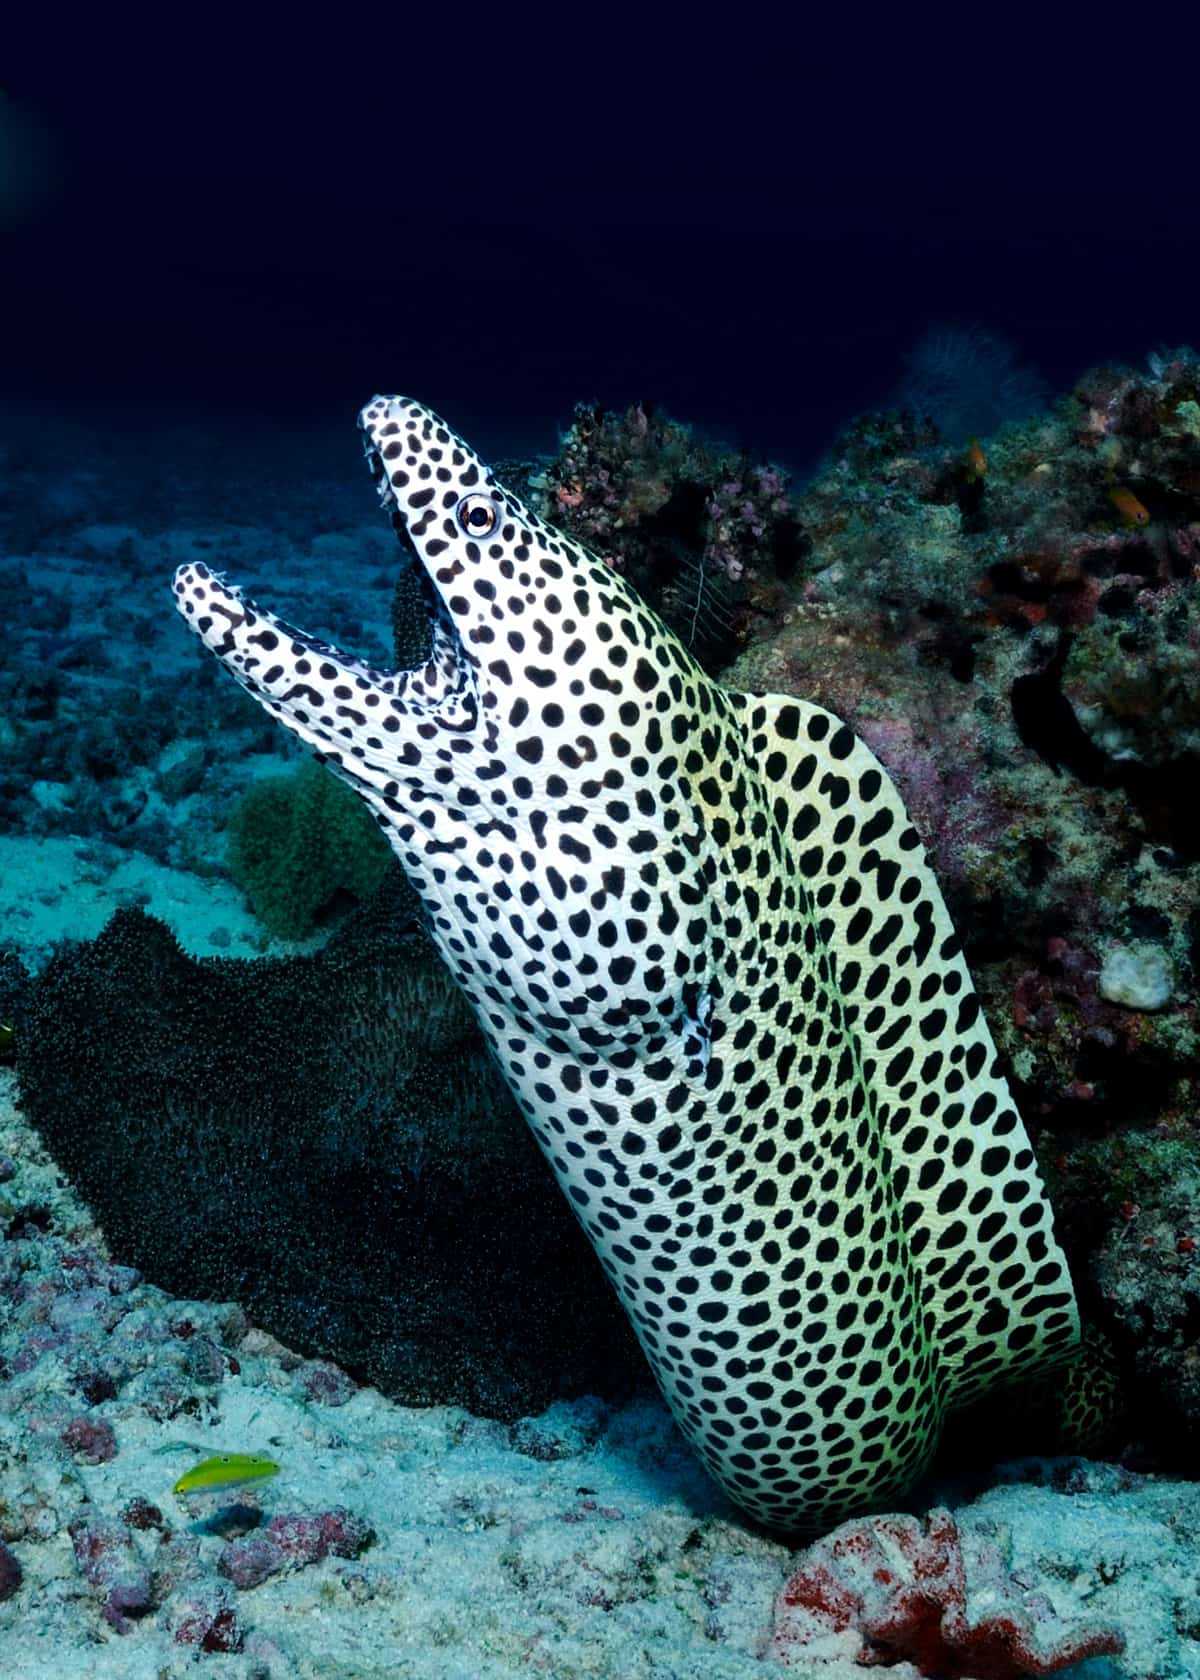 Facts about moray eels